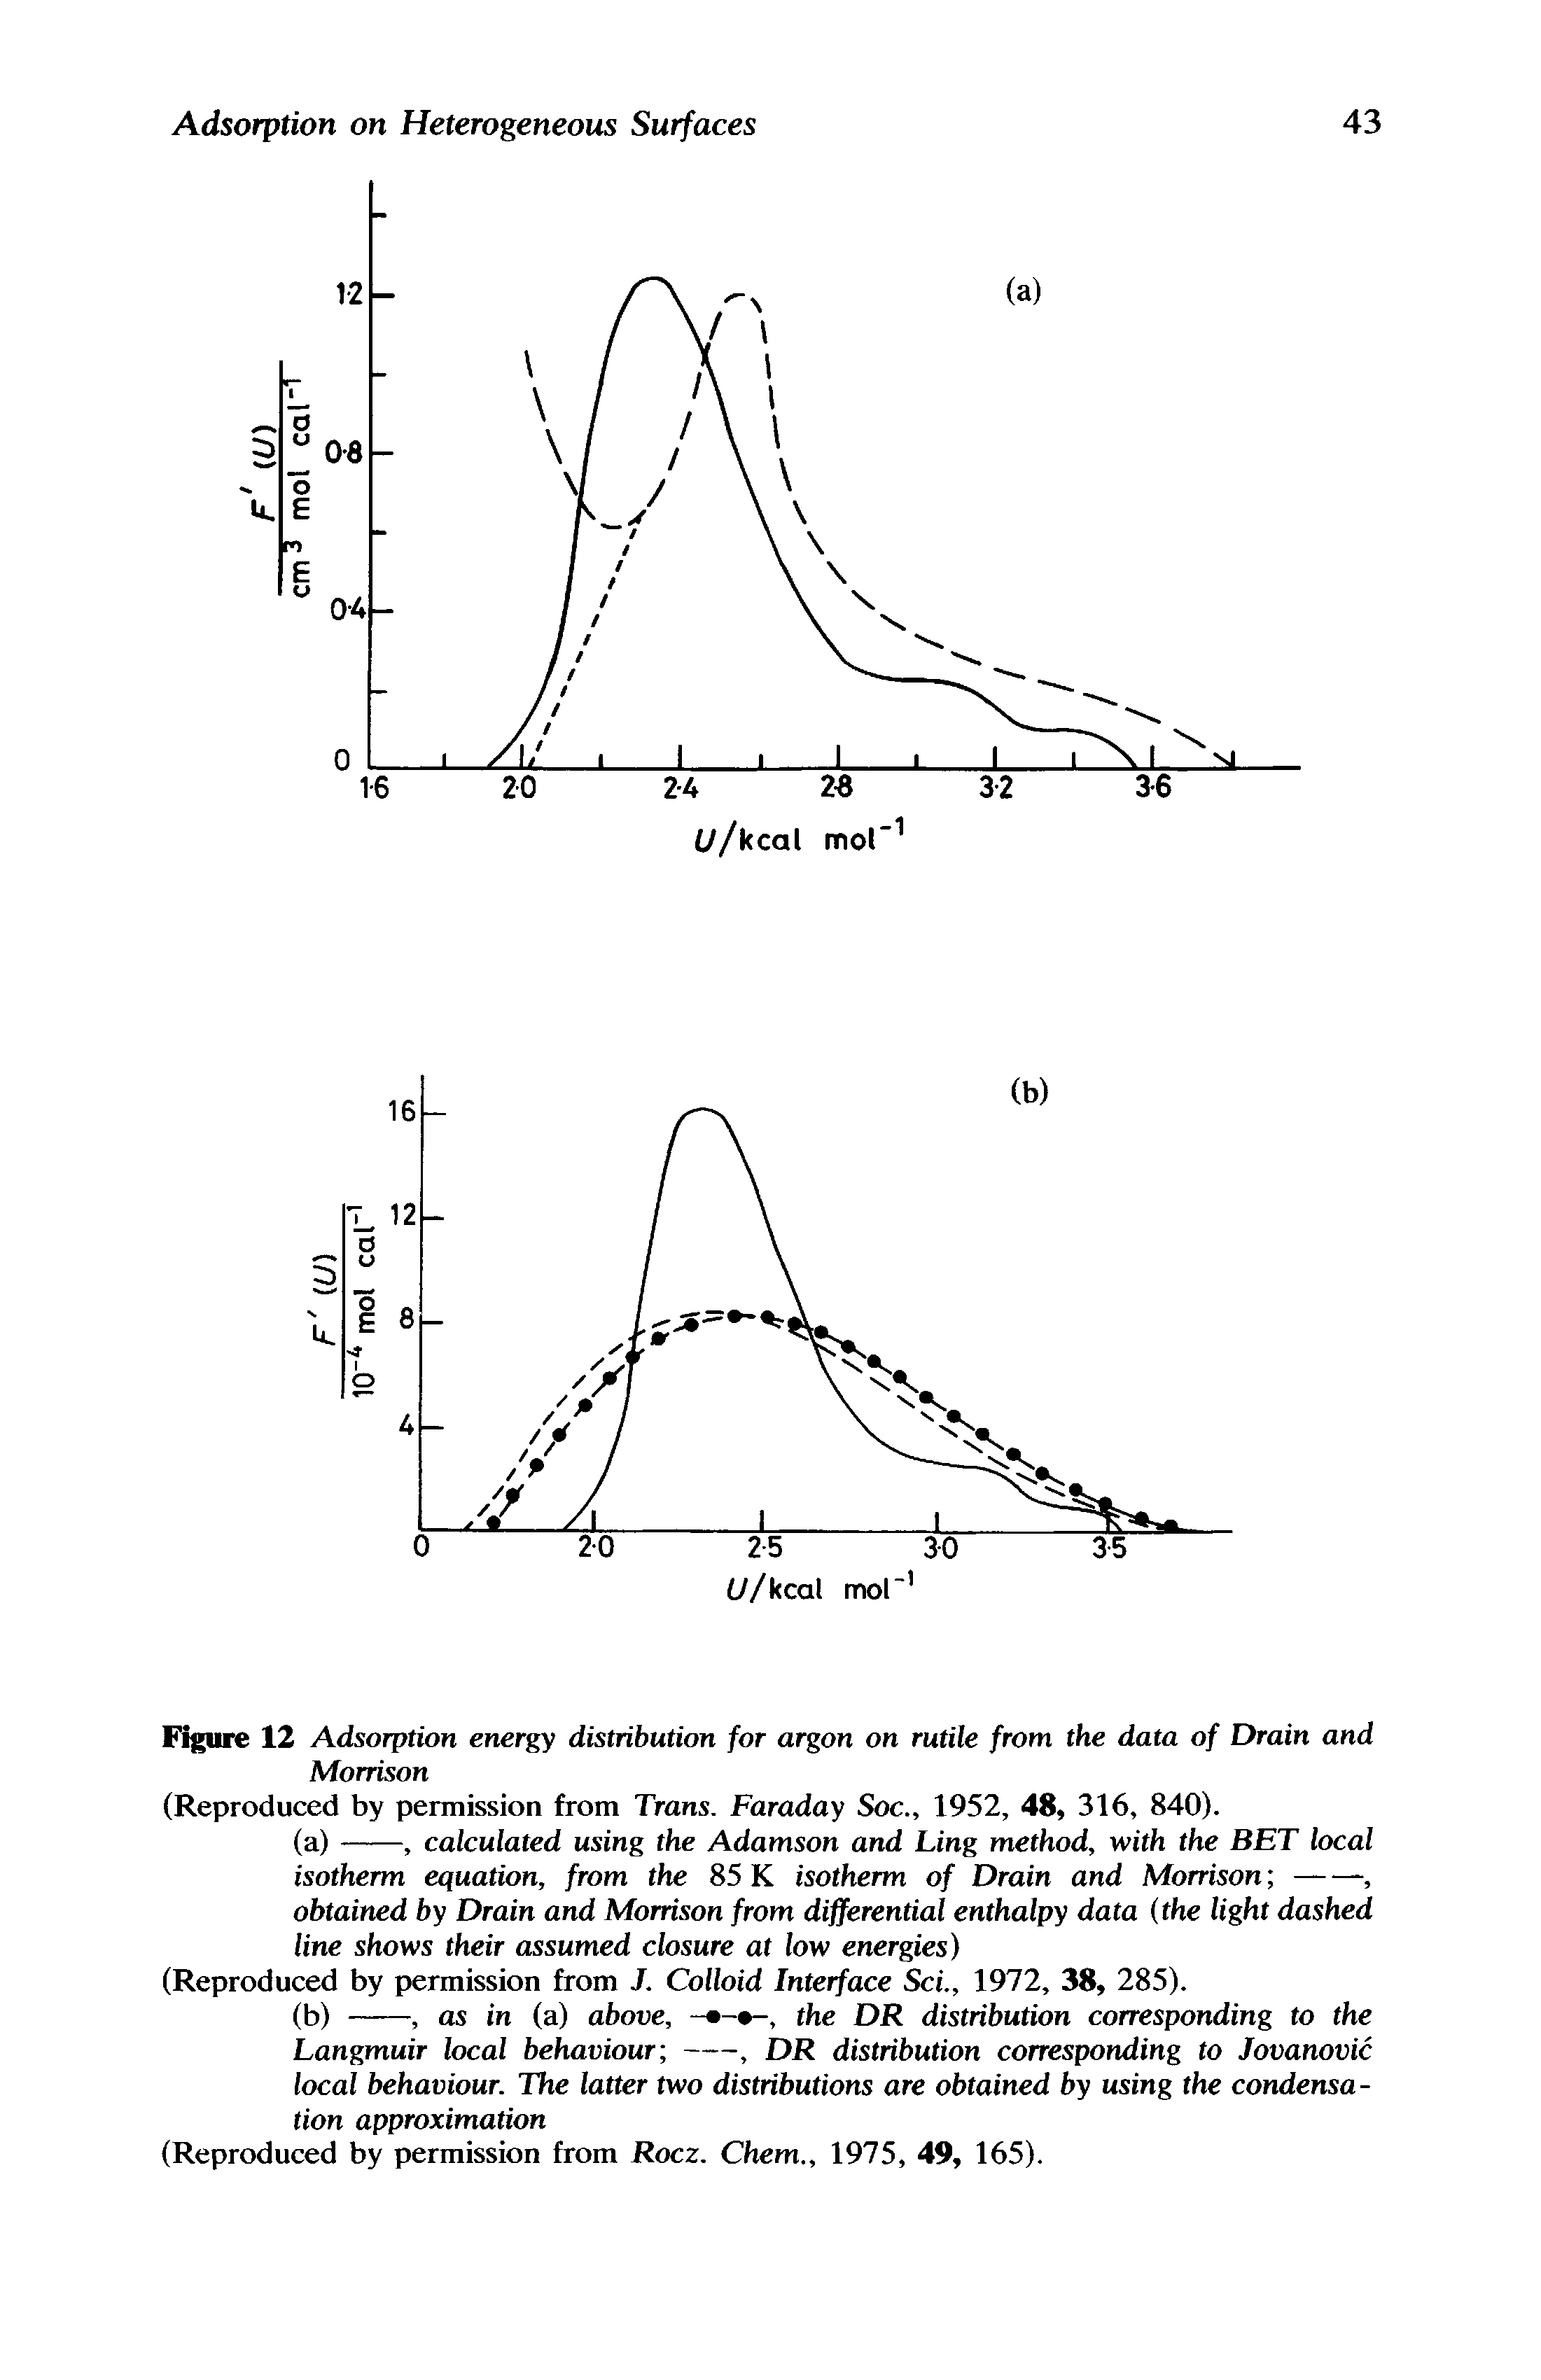 Figure 12 Adsorption energy distribution for argon on rutile from the data of Drain and Morrison...